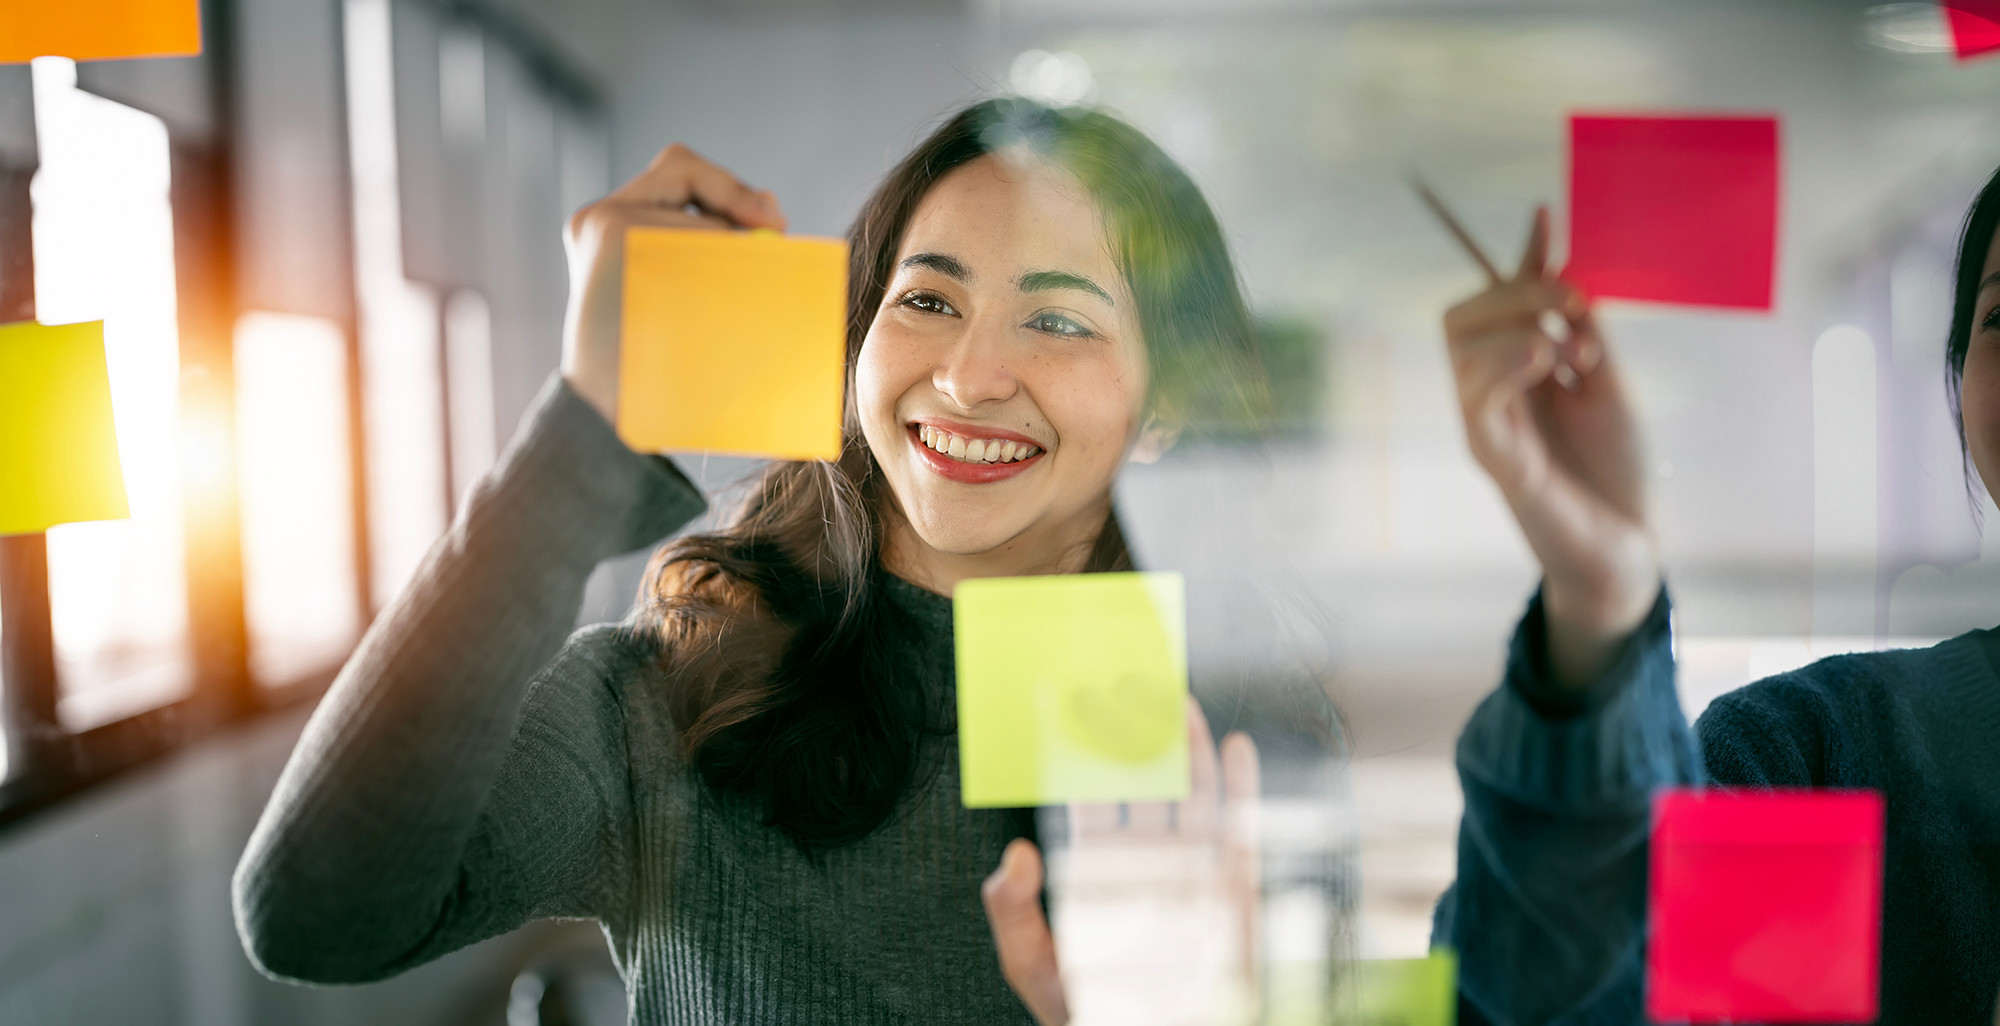 Smiling woman, writing on a post-it note, that's stuck on a glass wall.